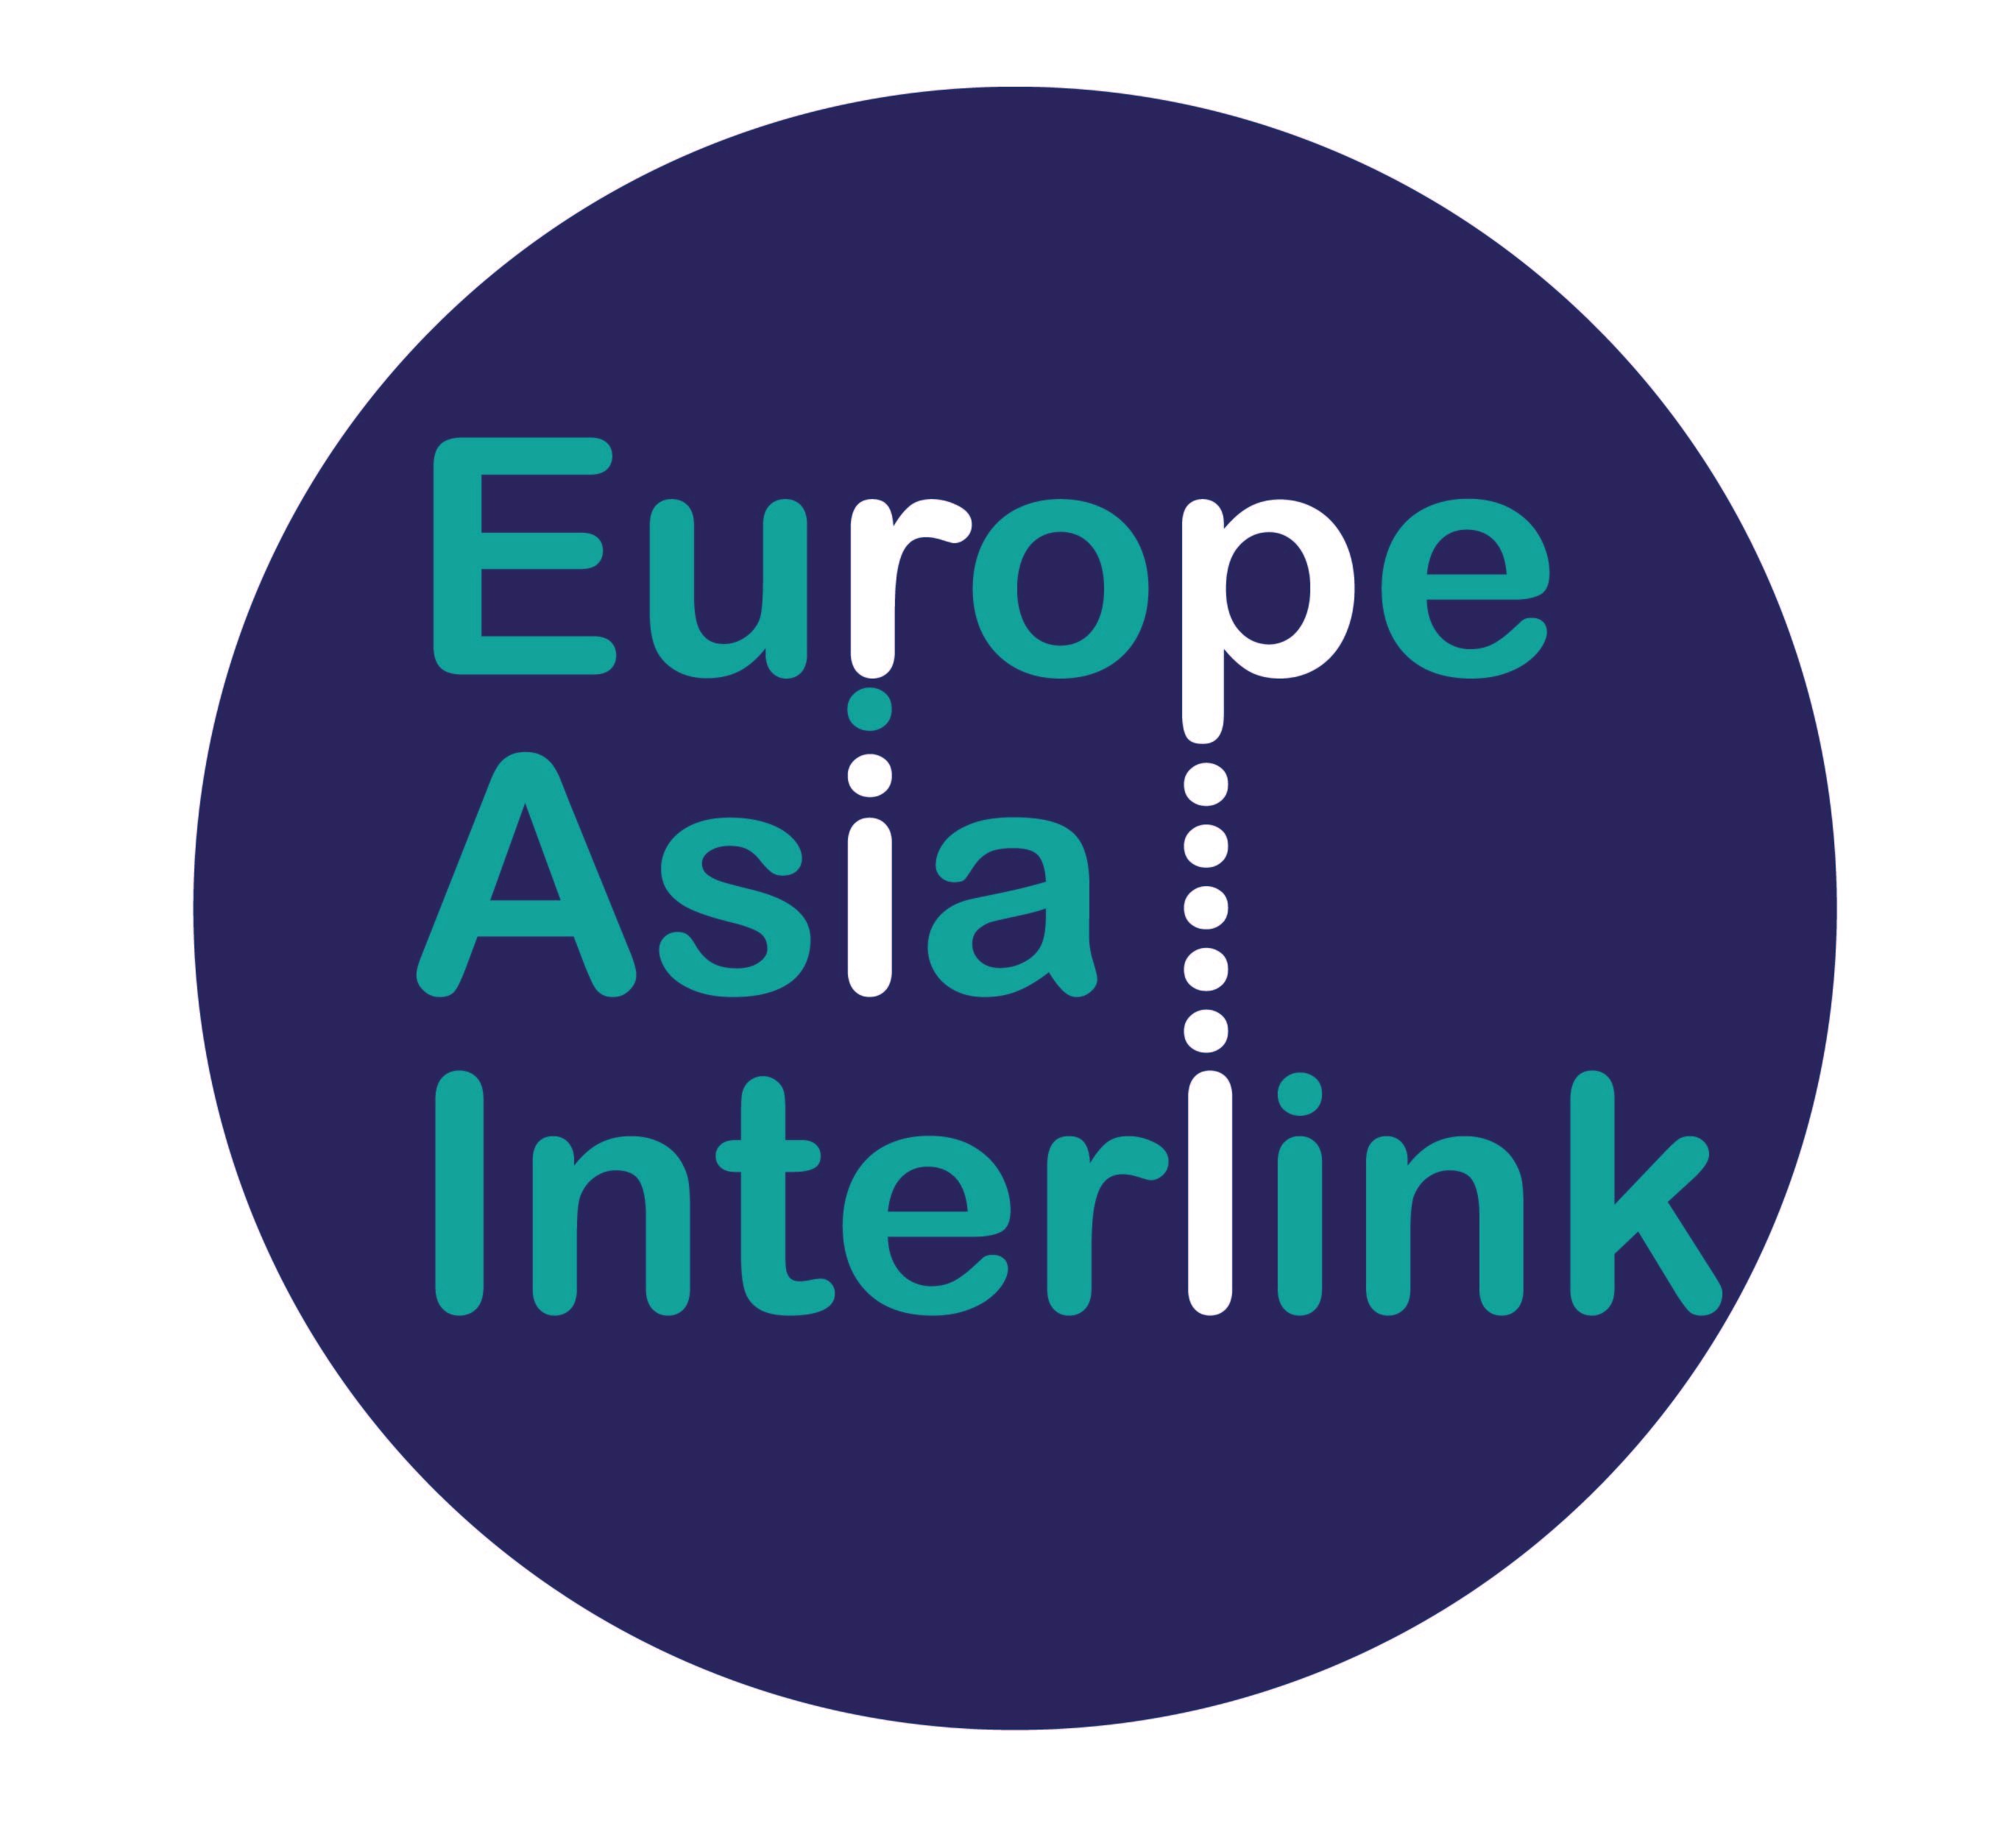 A new think-tank dedicated to open, informed debates, and independent, balanced research on EU economic and political relations with Asian partners.